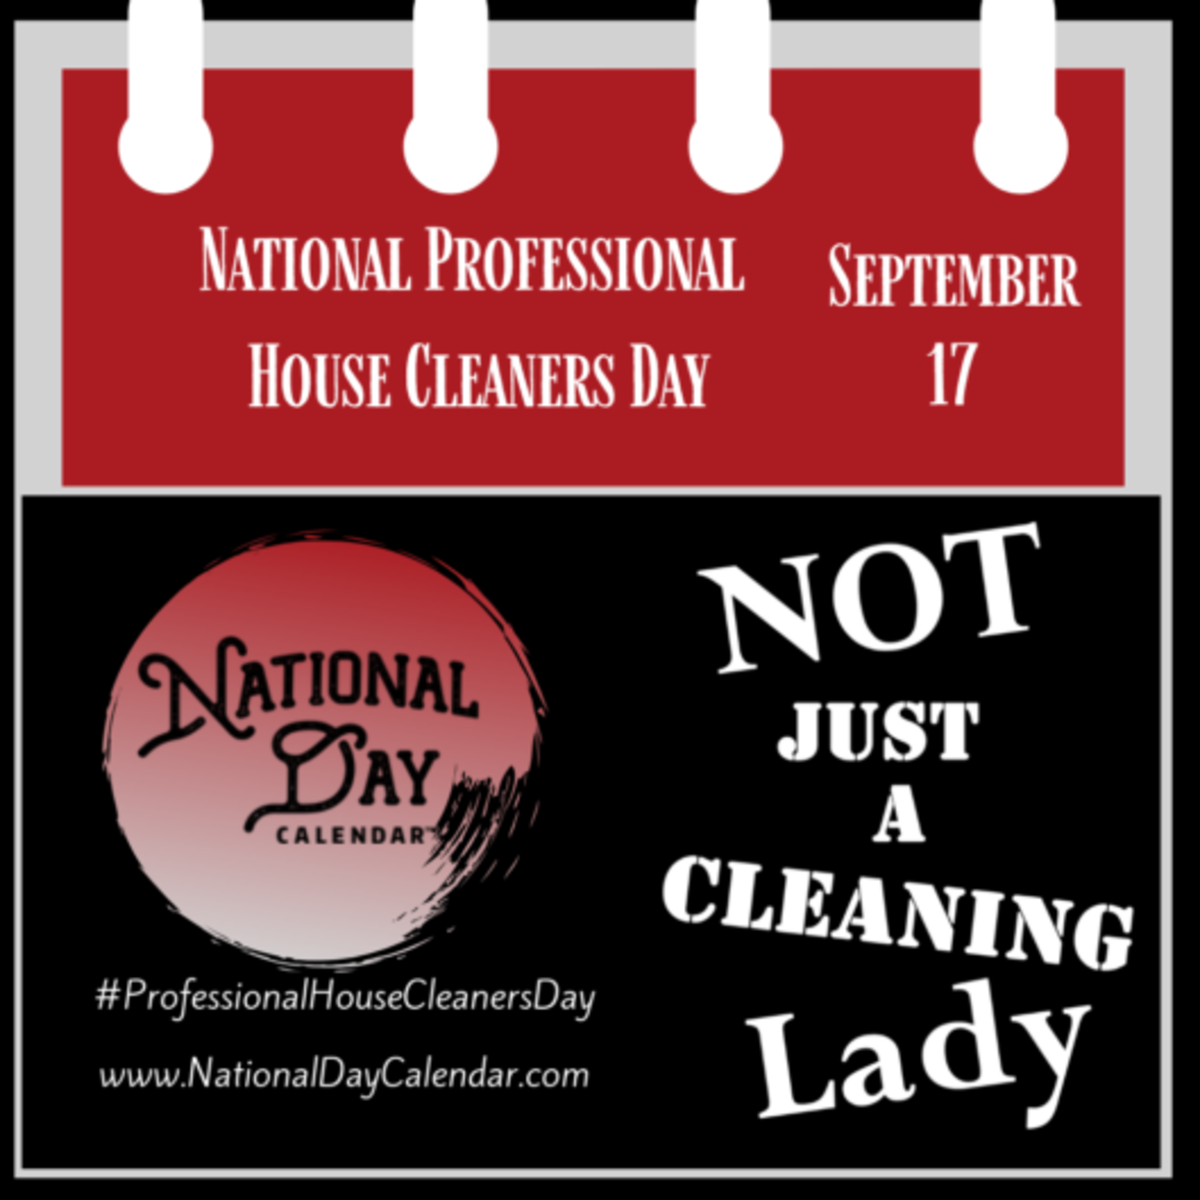 National Professional House Cleaners Day - September 17